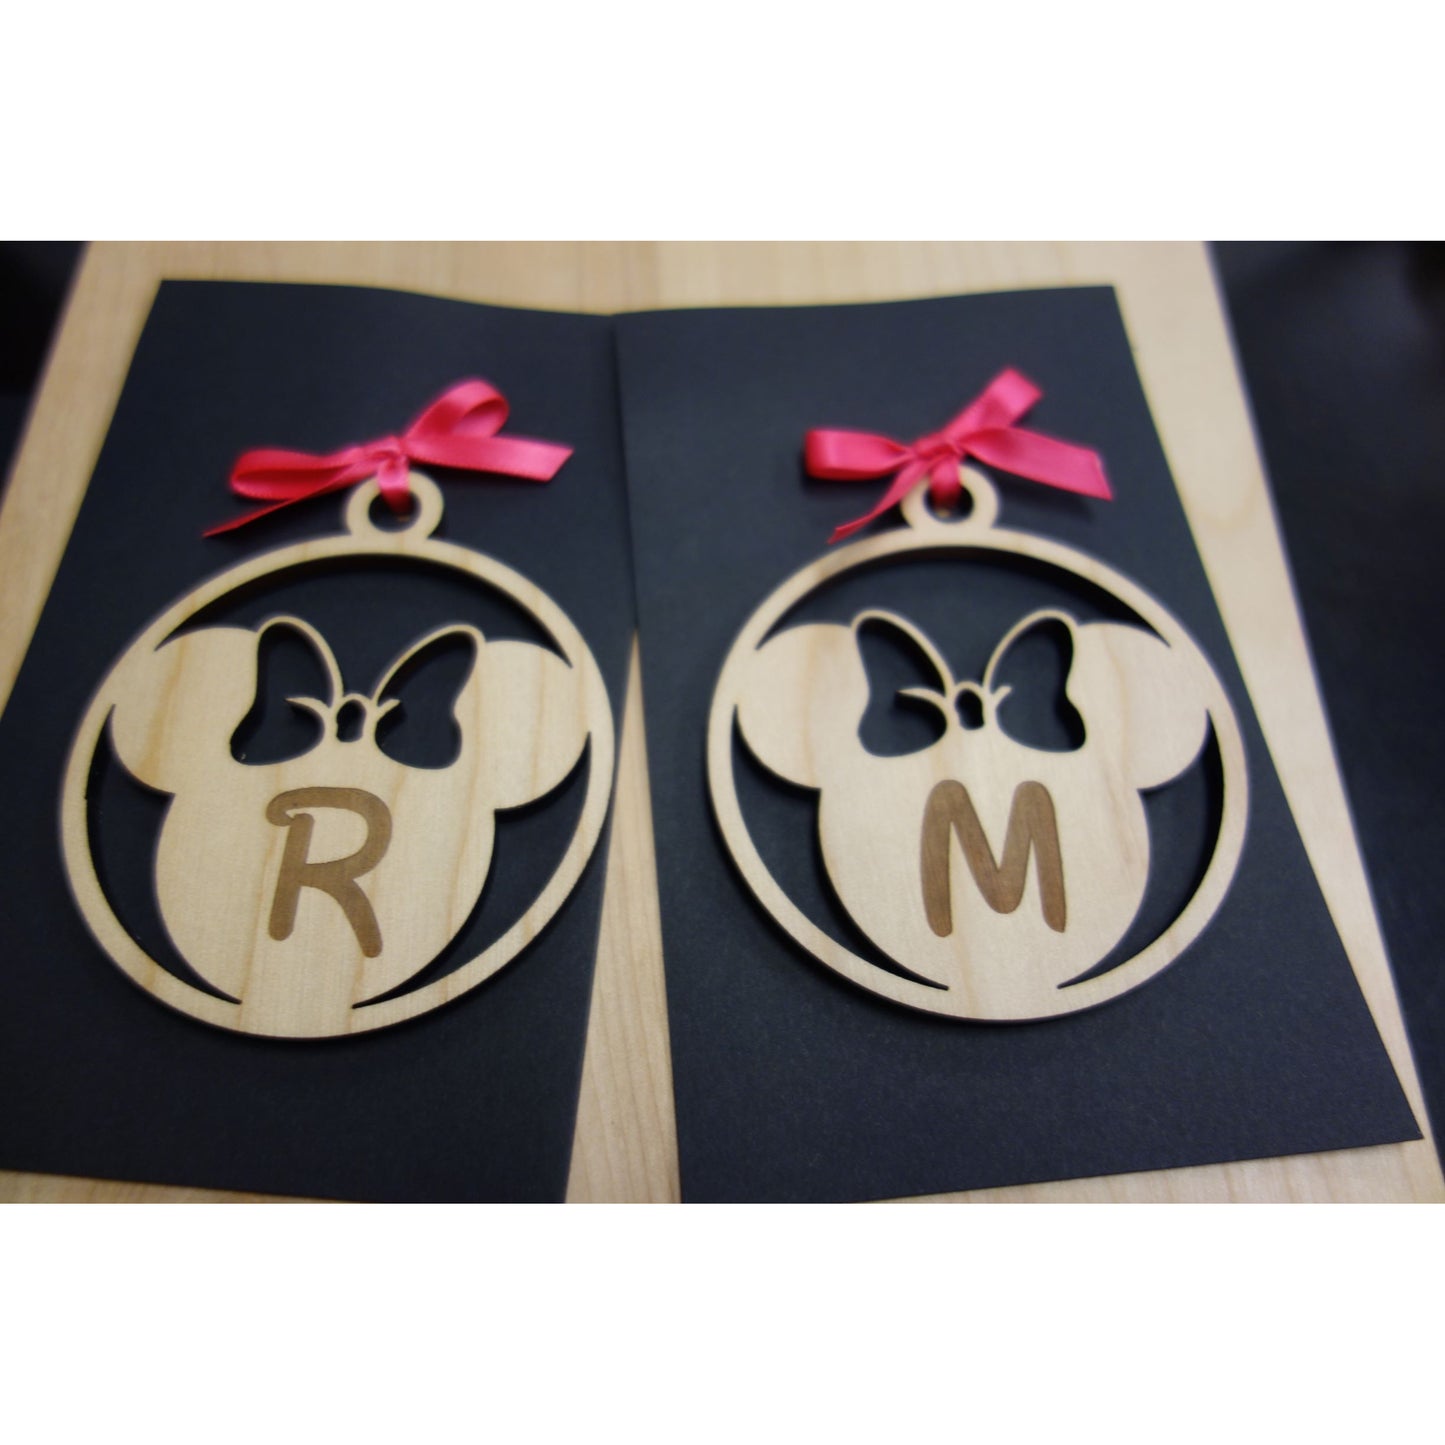 *CUSTOM ORDER* Minnie Mouse Inspired Ornament